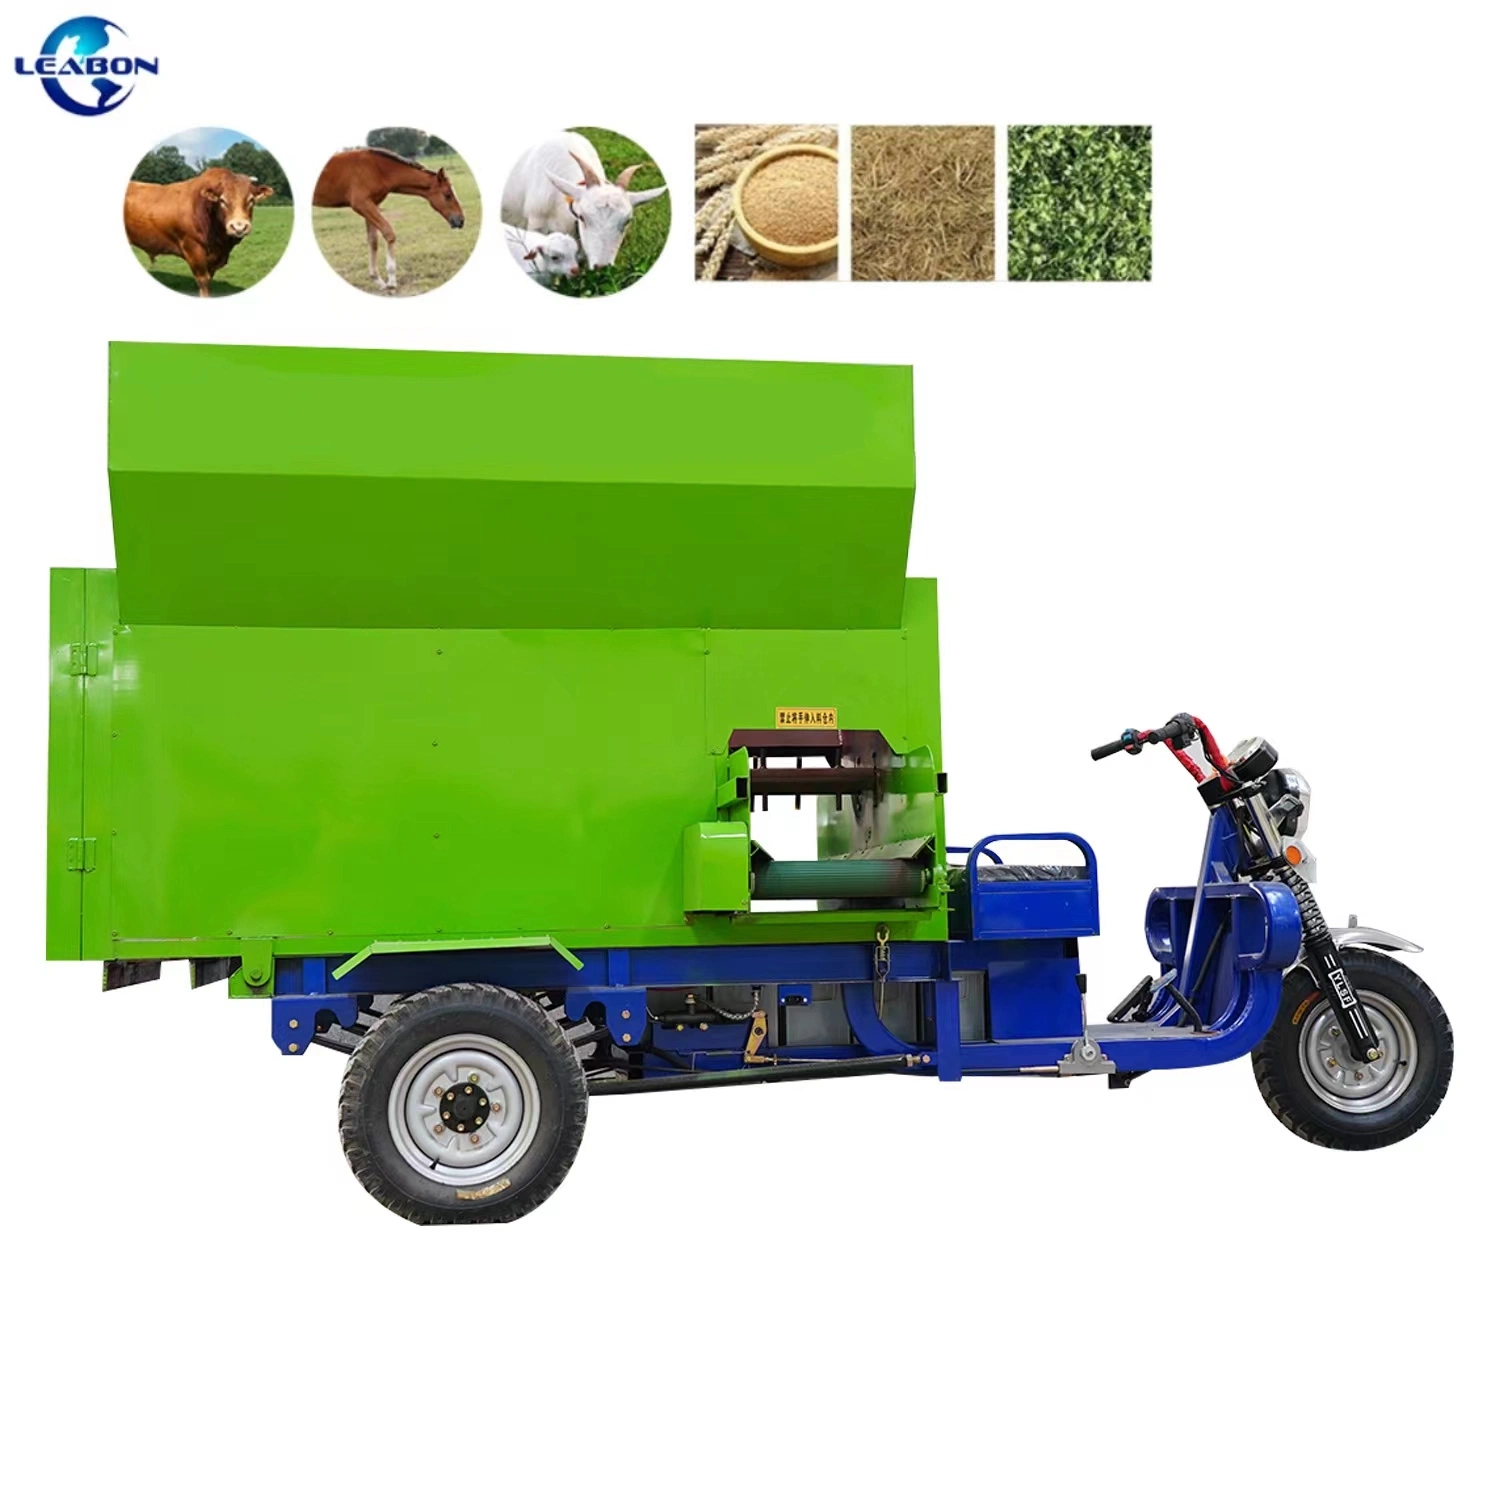 CE Certification Tmr Livestock Feed Mixer Spreader Silage Grass Forage Mixing Machine